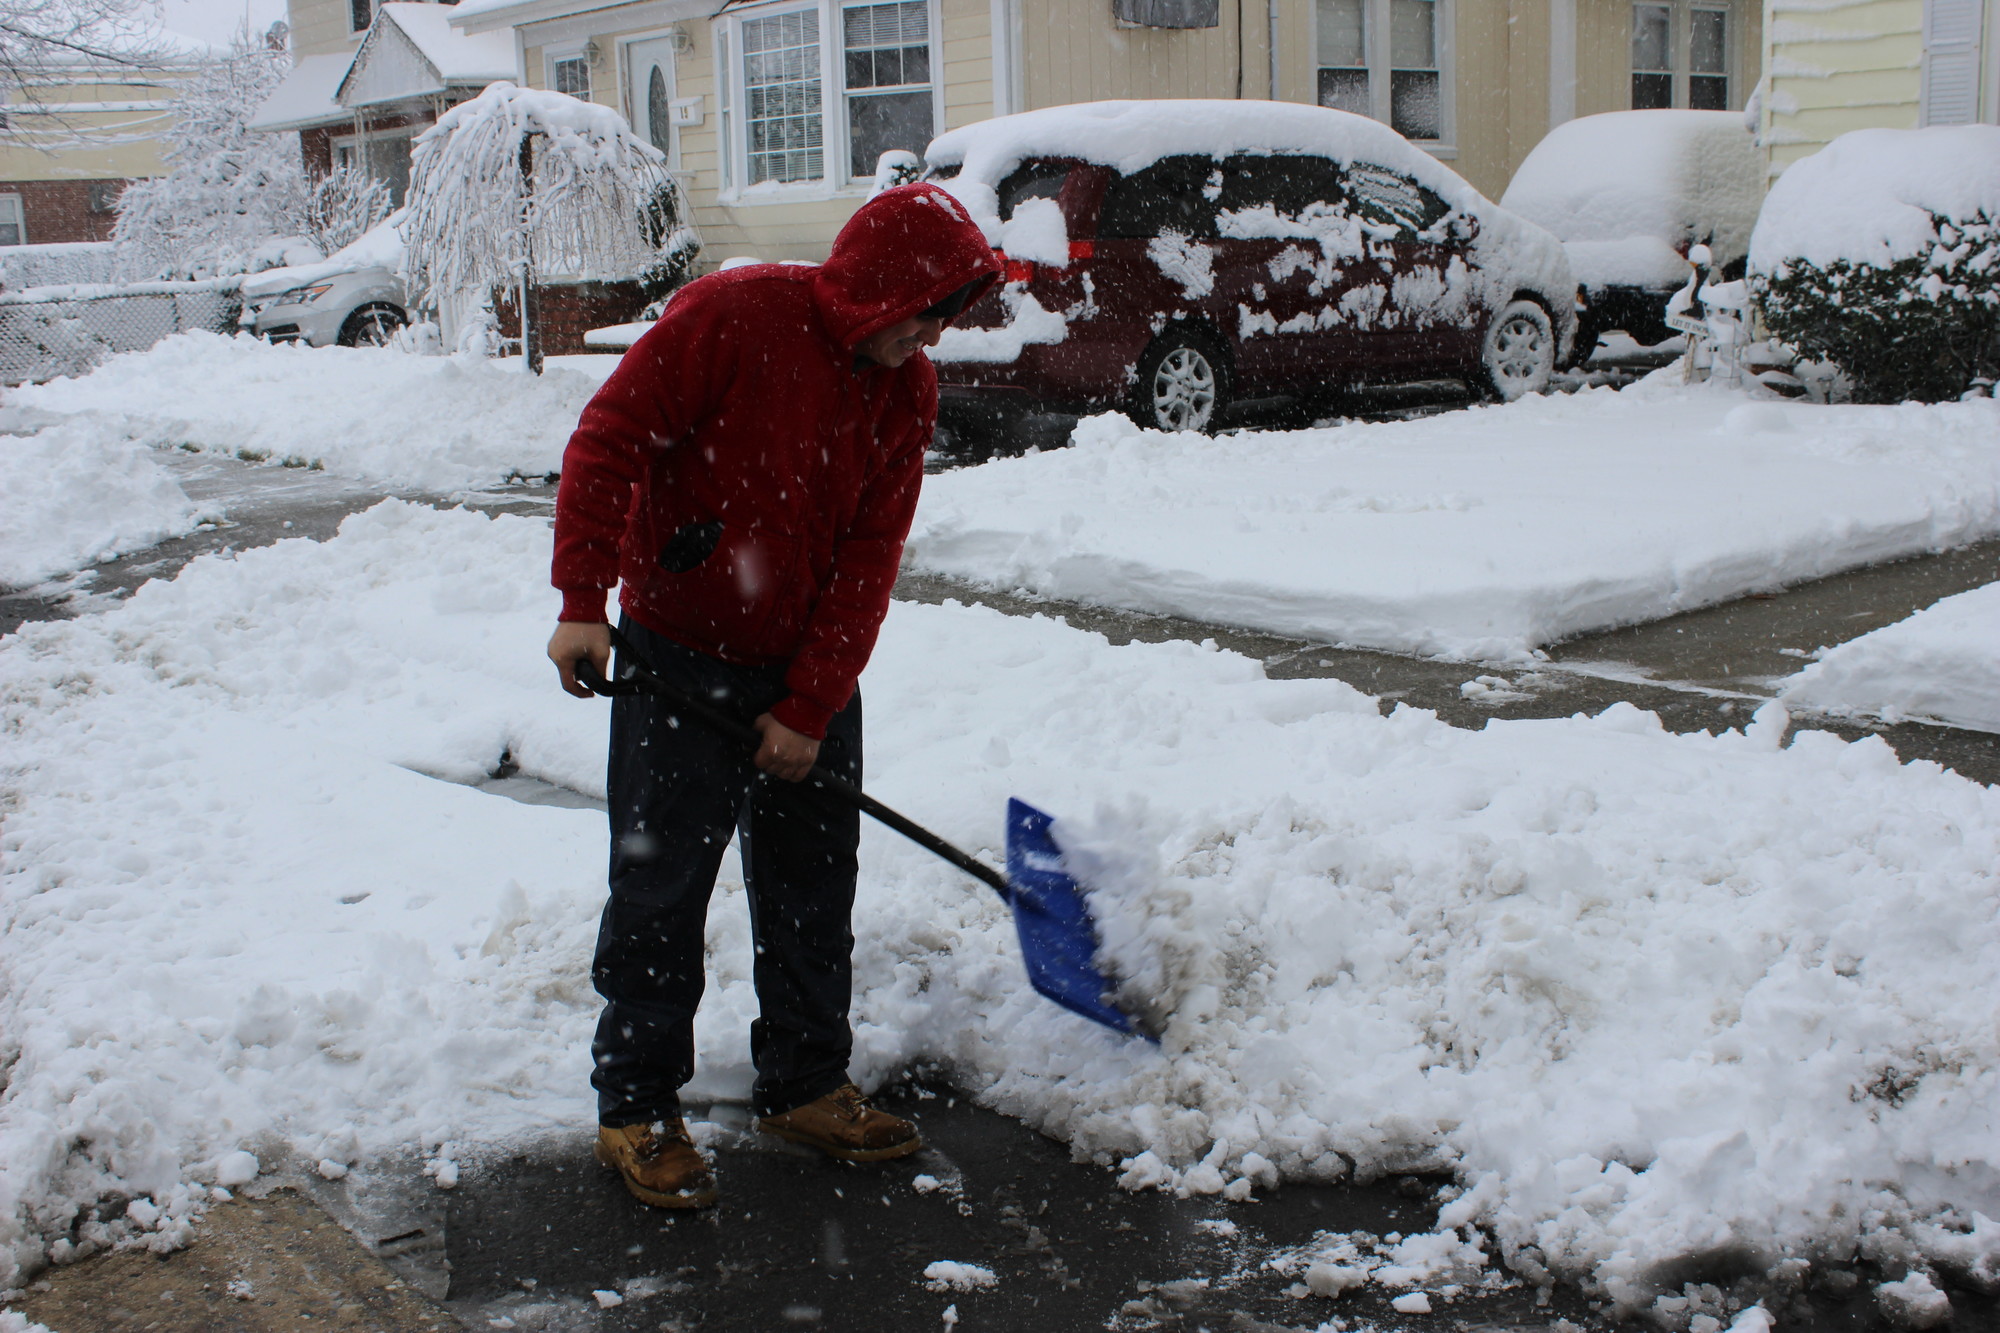 Mario Castro shoveled outside his home on Cottage Street Friday afternoon.